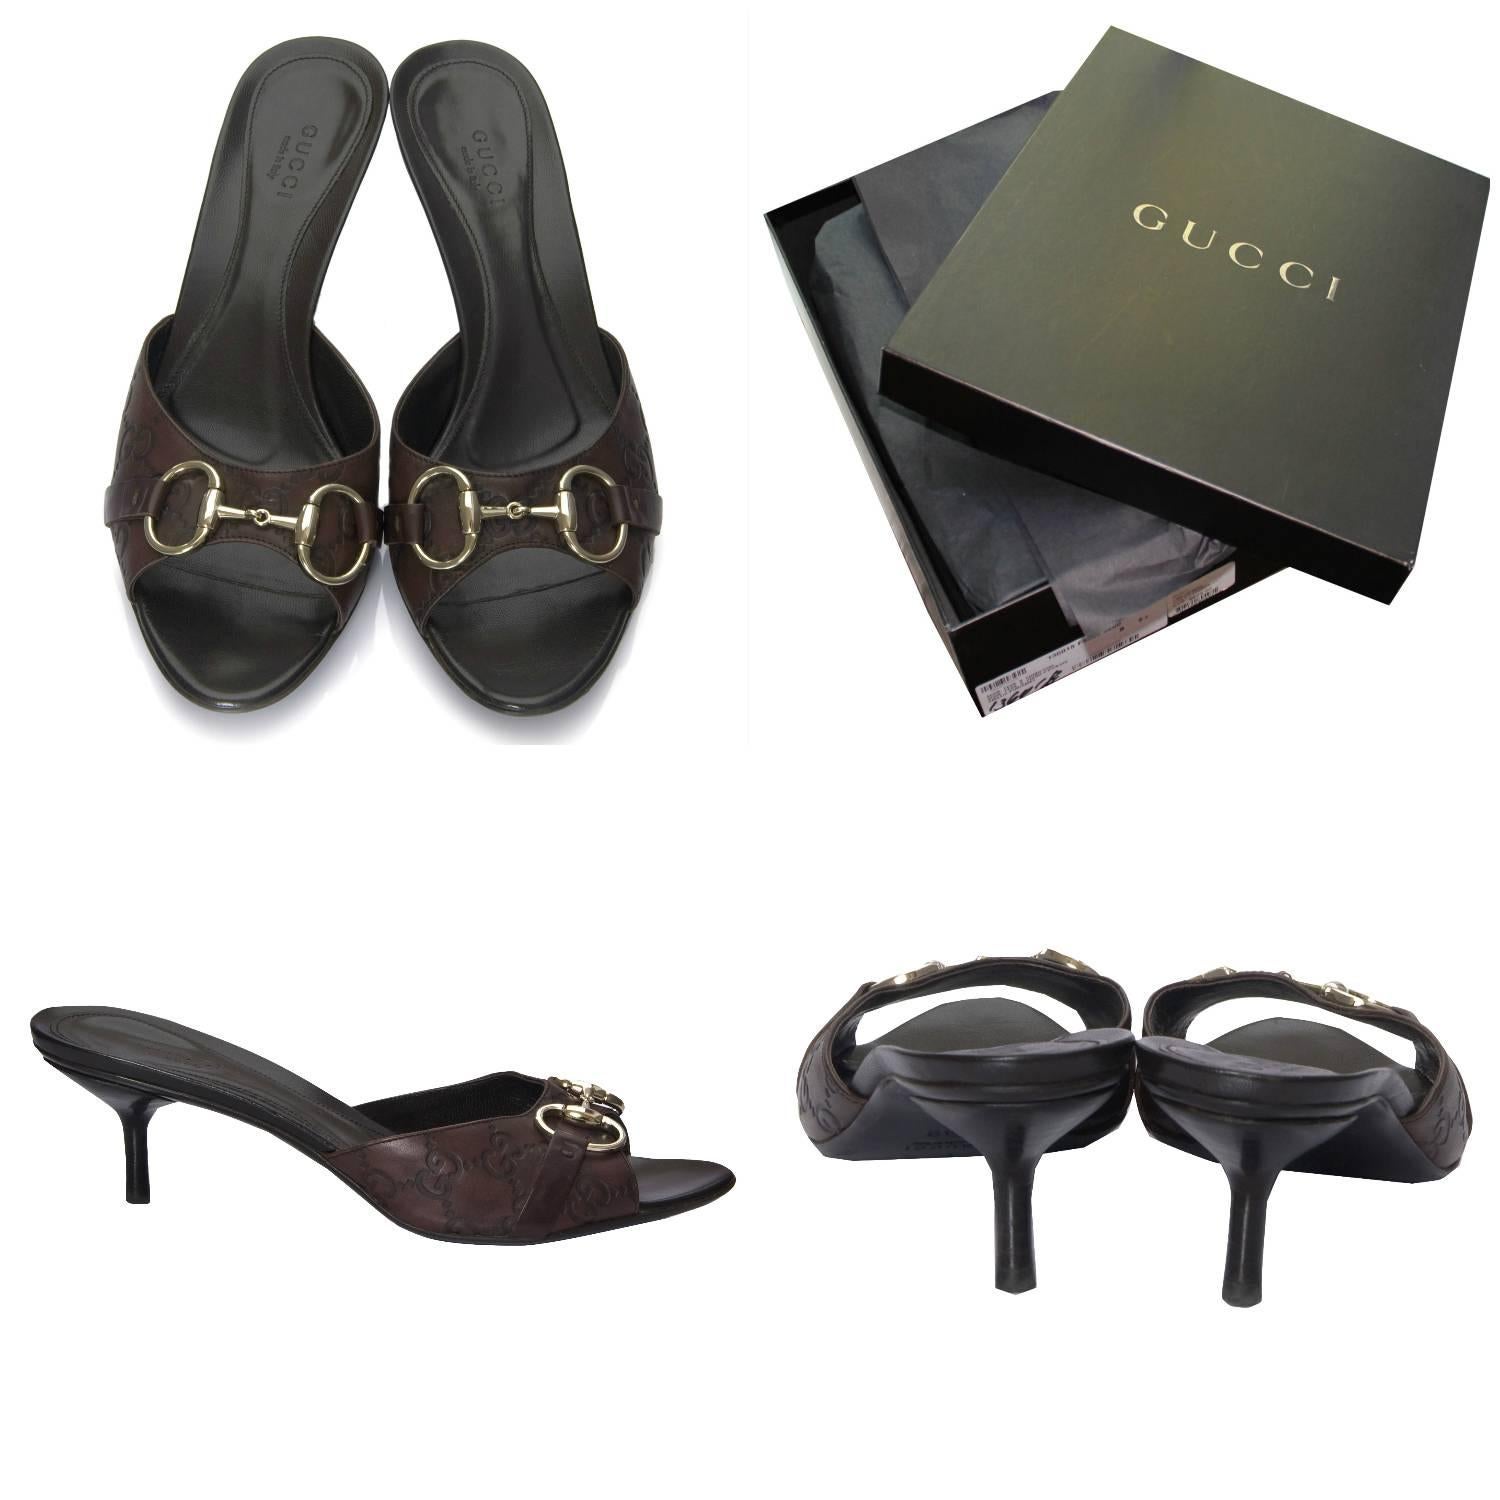 Gucci Mules 
Worn Twice
* Upper Shoes & Insoles are Perfect 
* Size: 7.5
* Brown Guccissima Leather GG
* Gold Horsebit Toe 
* Leather Footbed
* Wood Heel
* 2.5